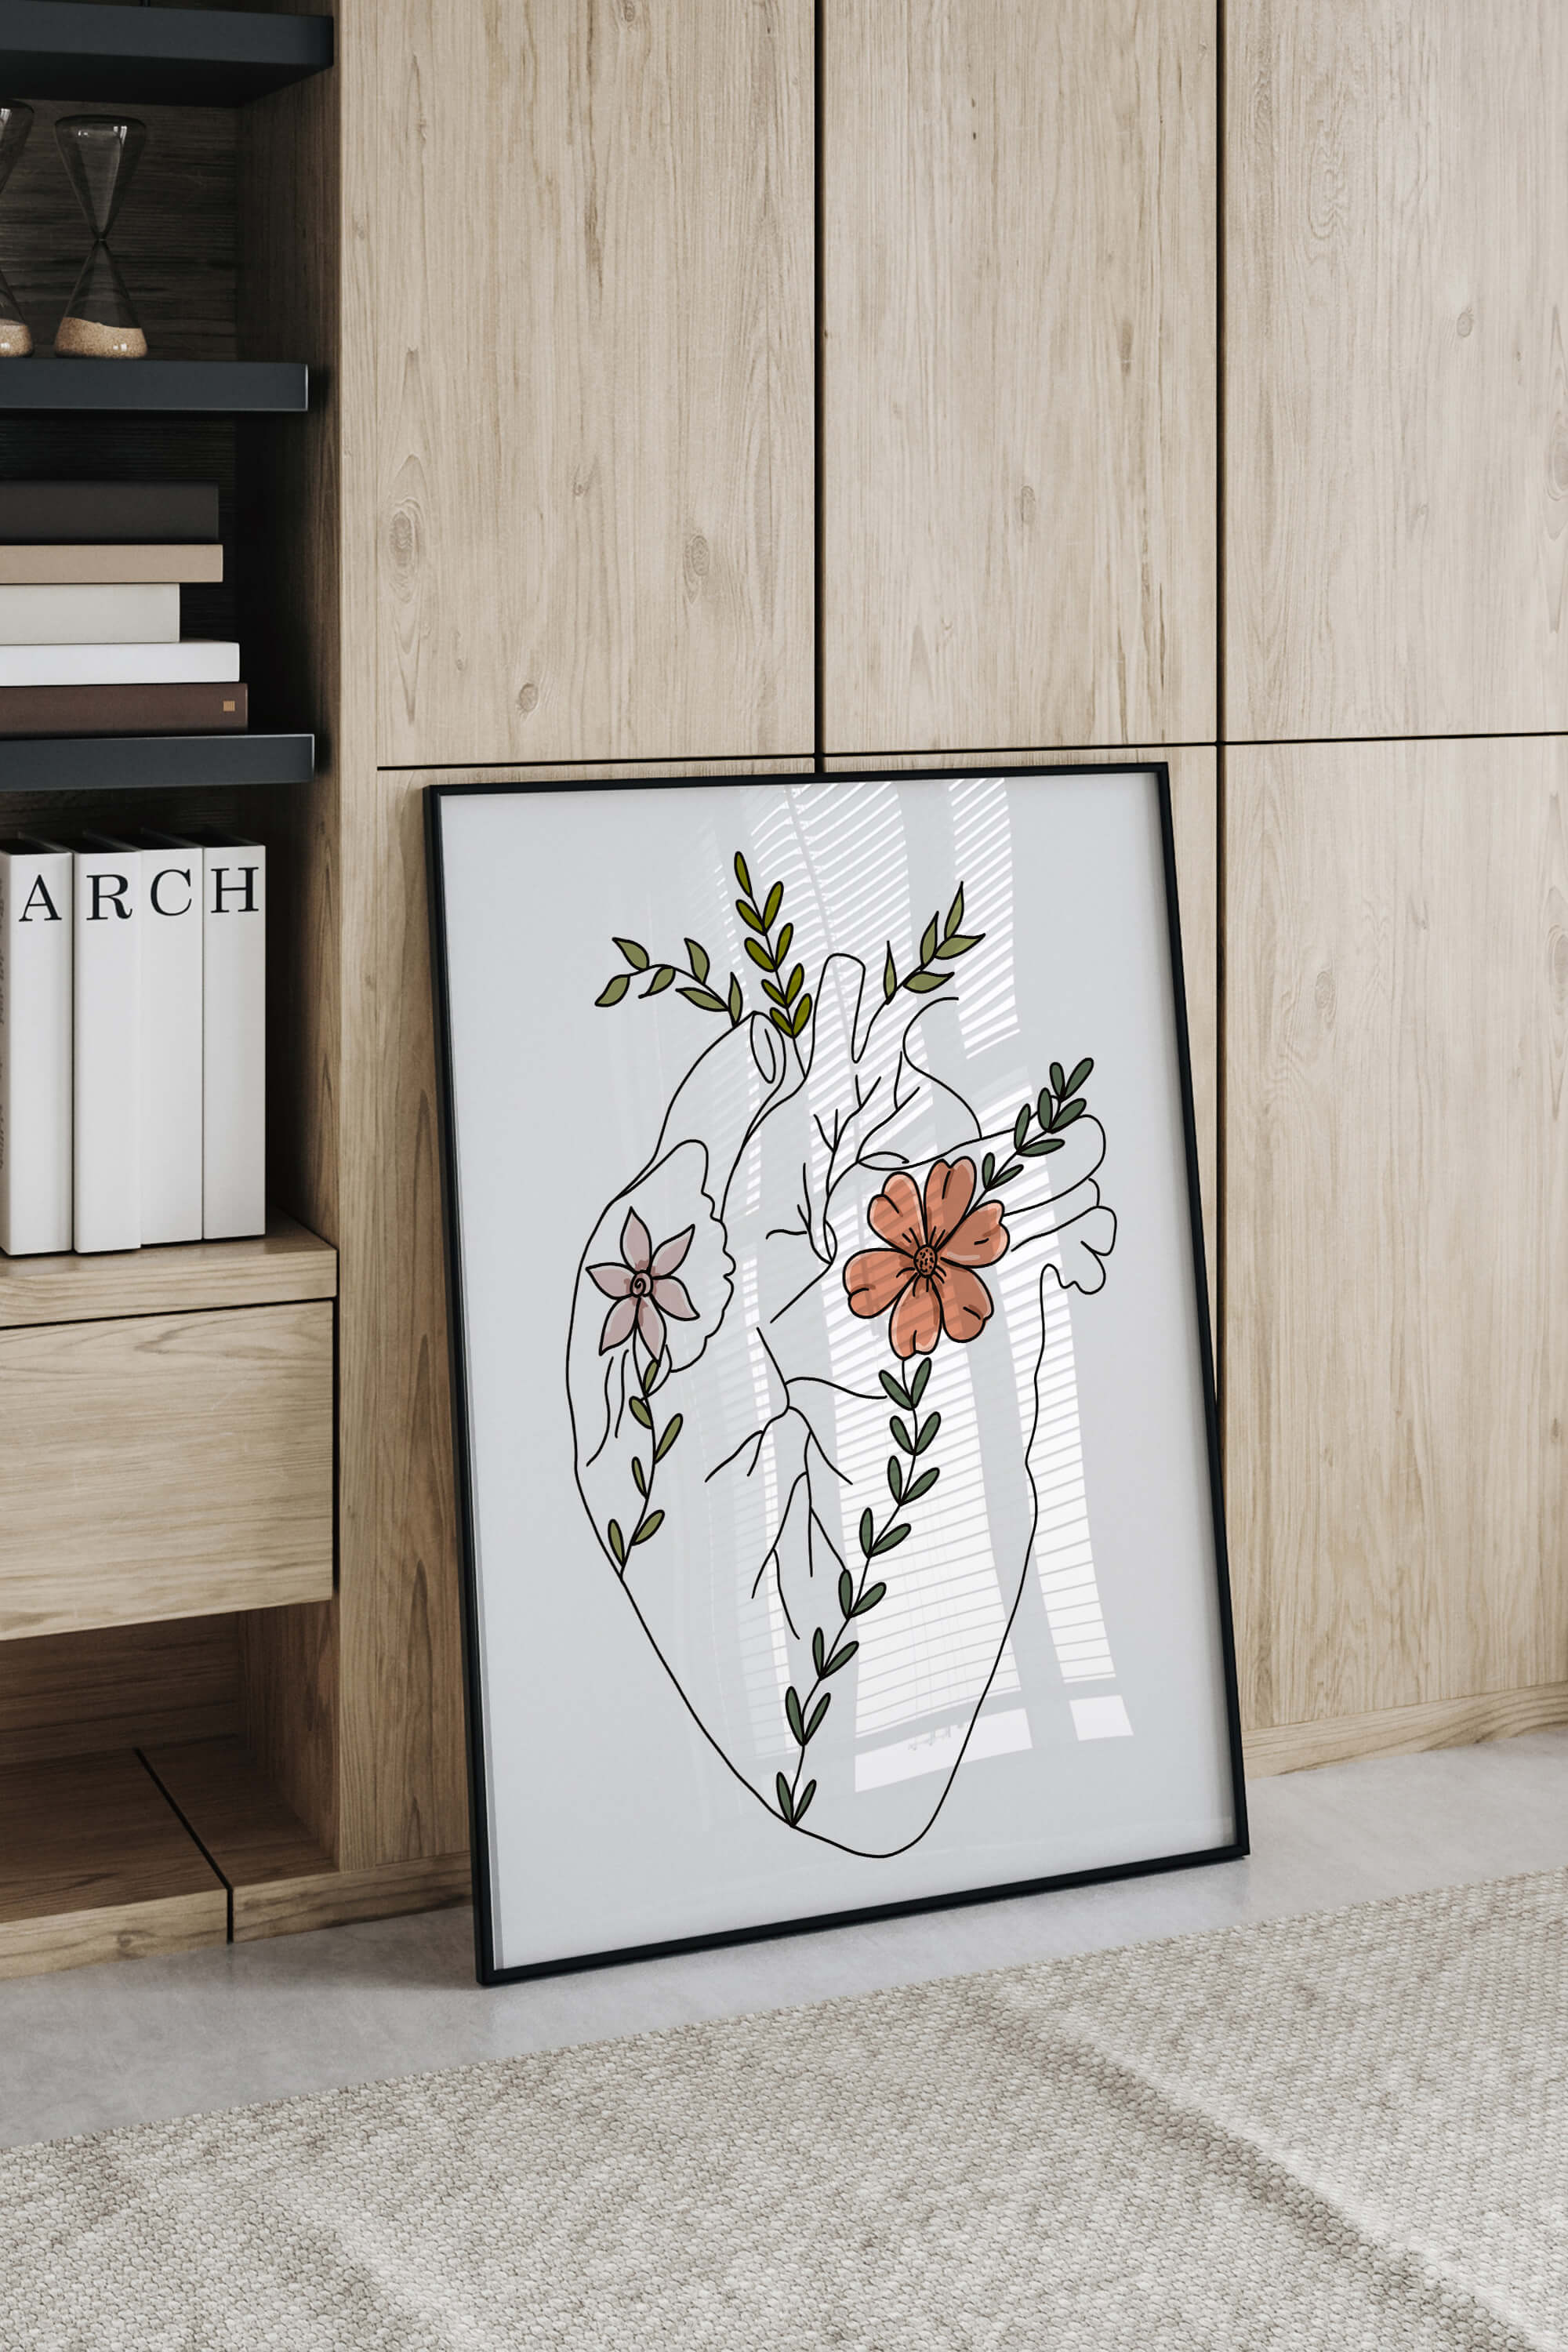 Abstract heart line art print, modern and chic, ideal for enhancing bedroom wall decor with a romantic twist.